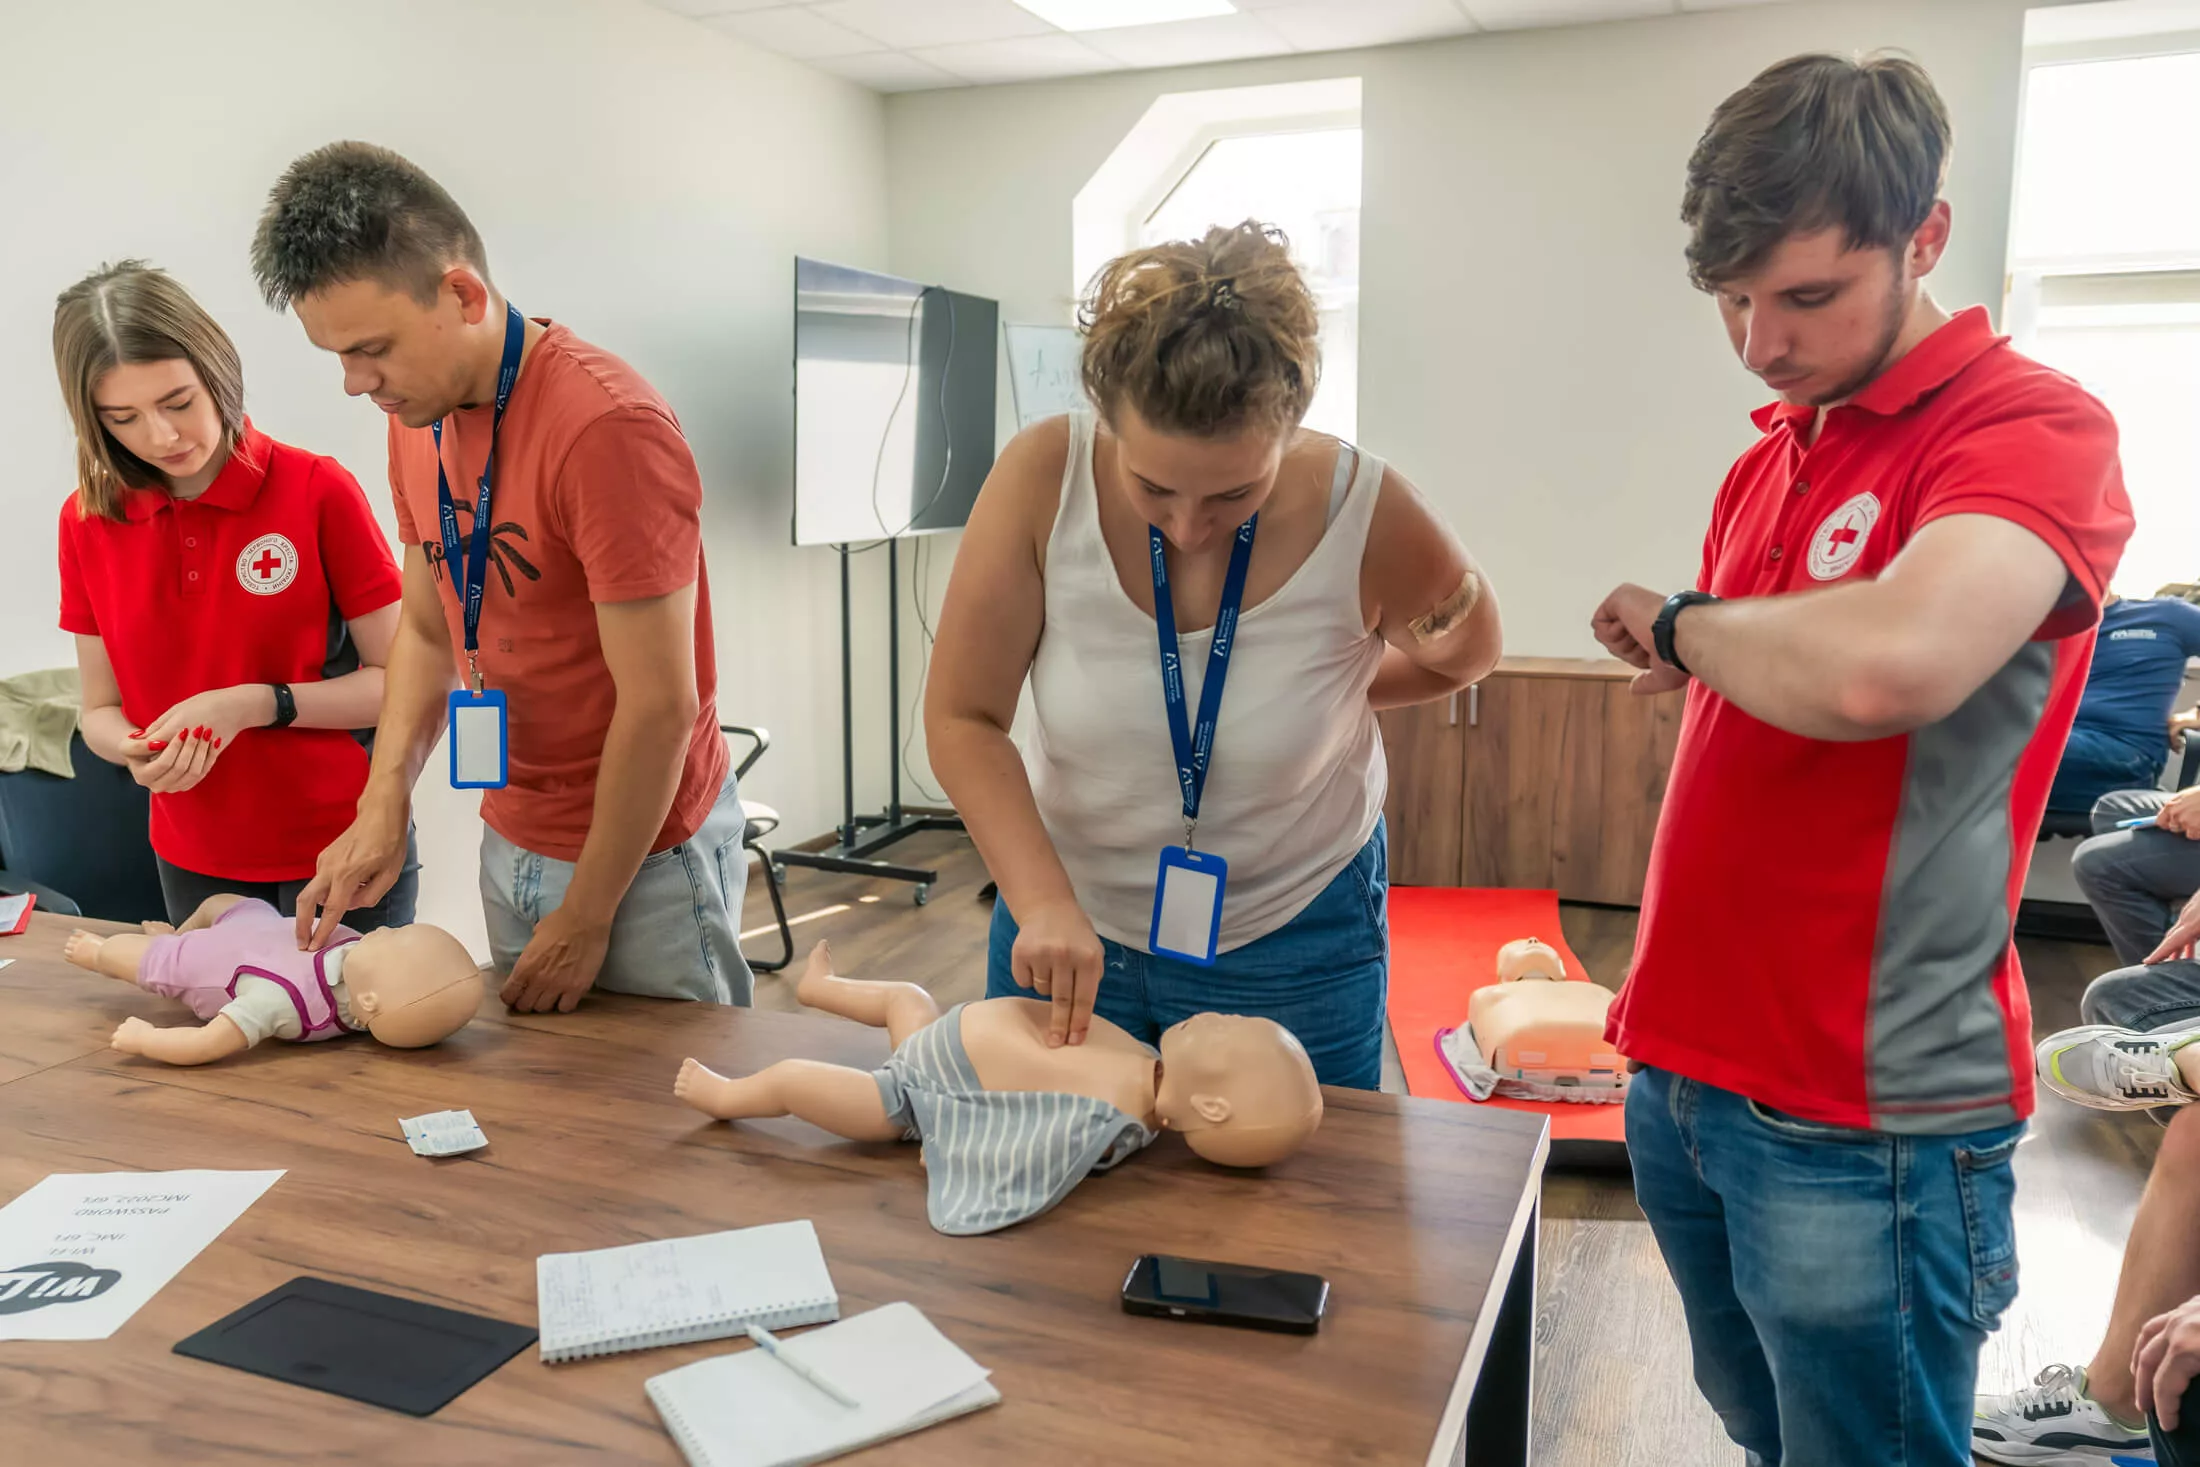 Students in our emergency first aid training learn basic yet lifesaving skills such as CPR.